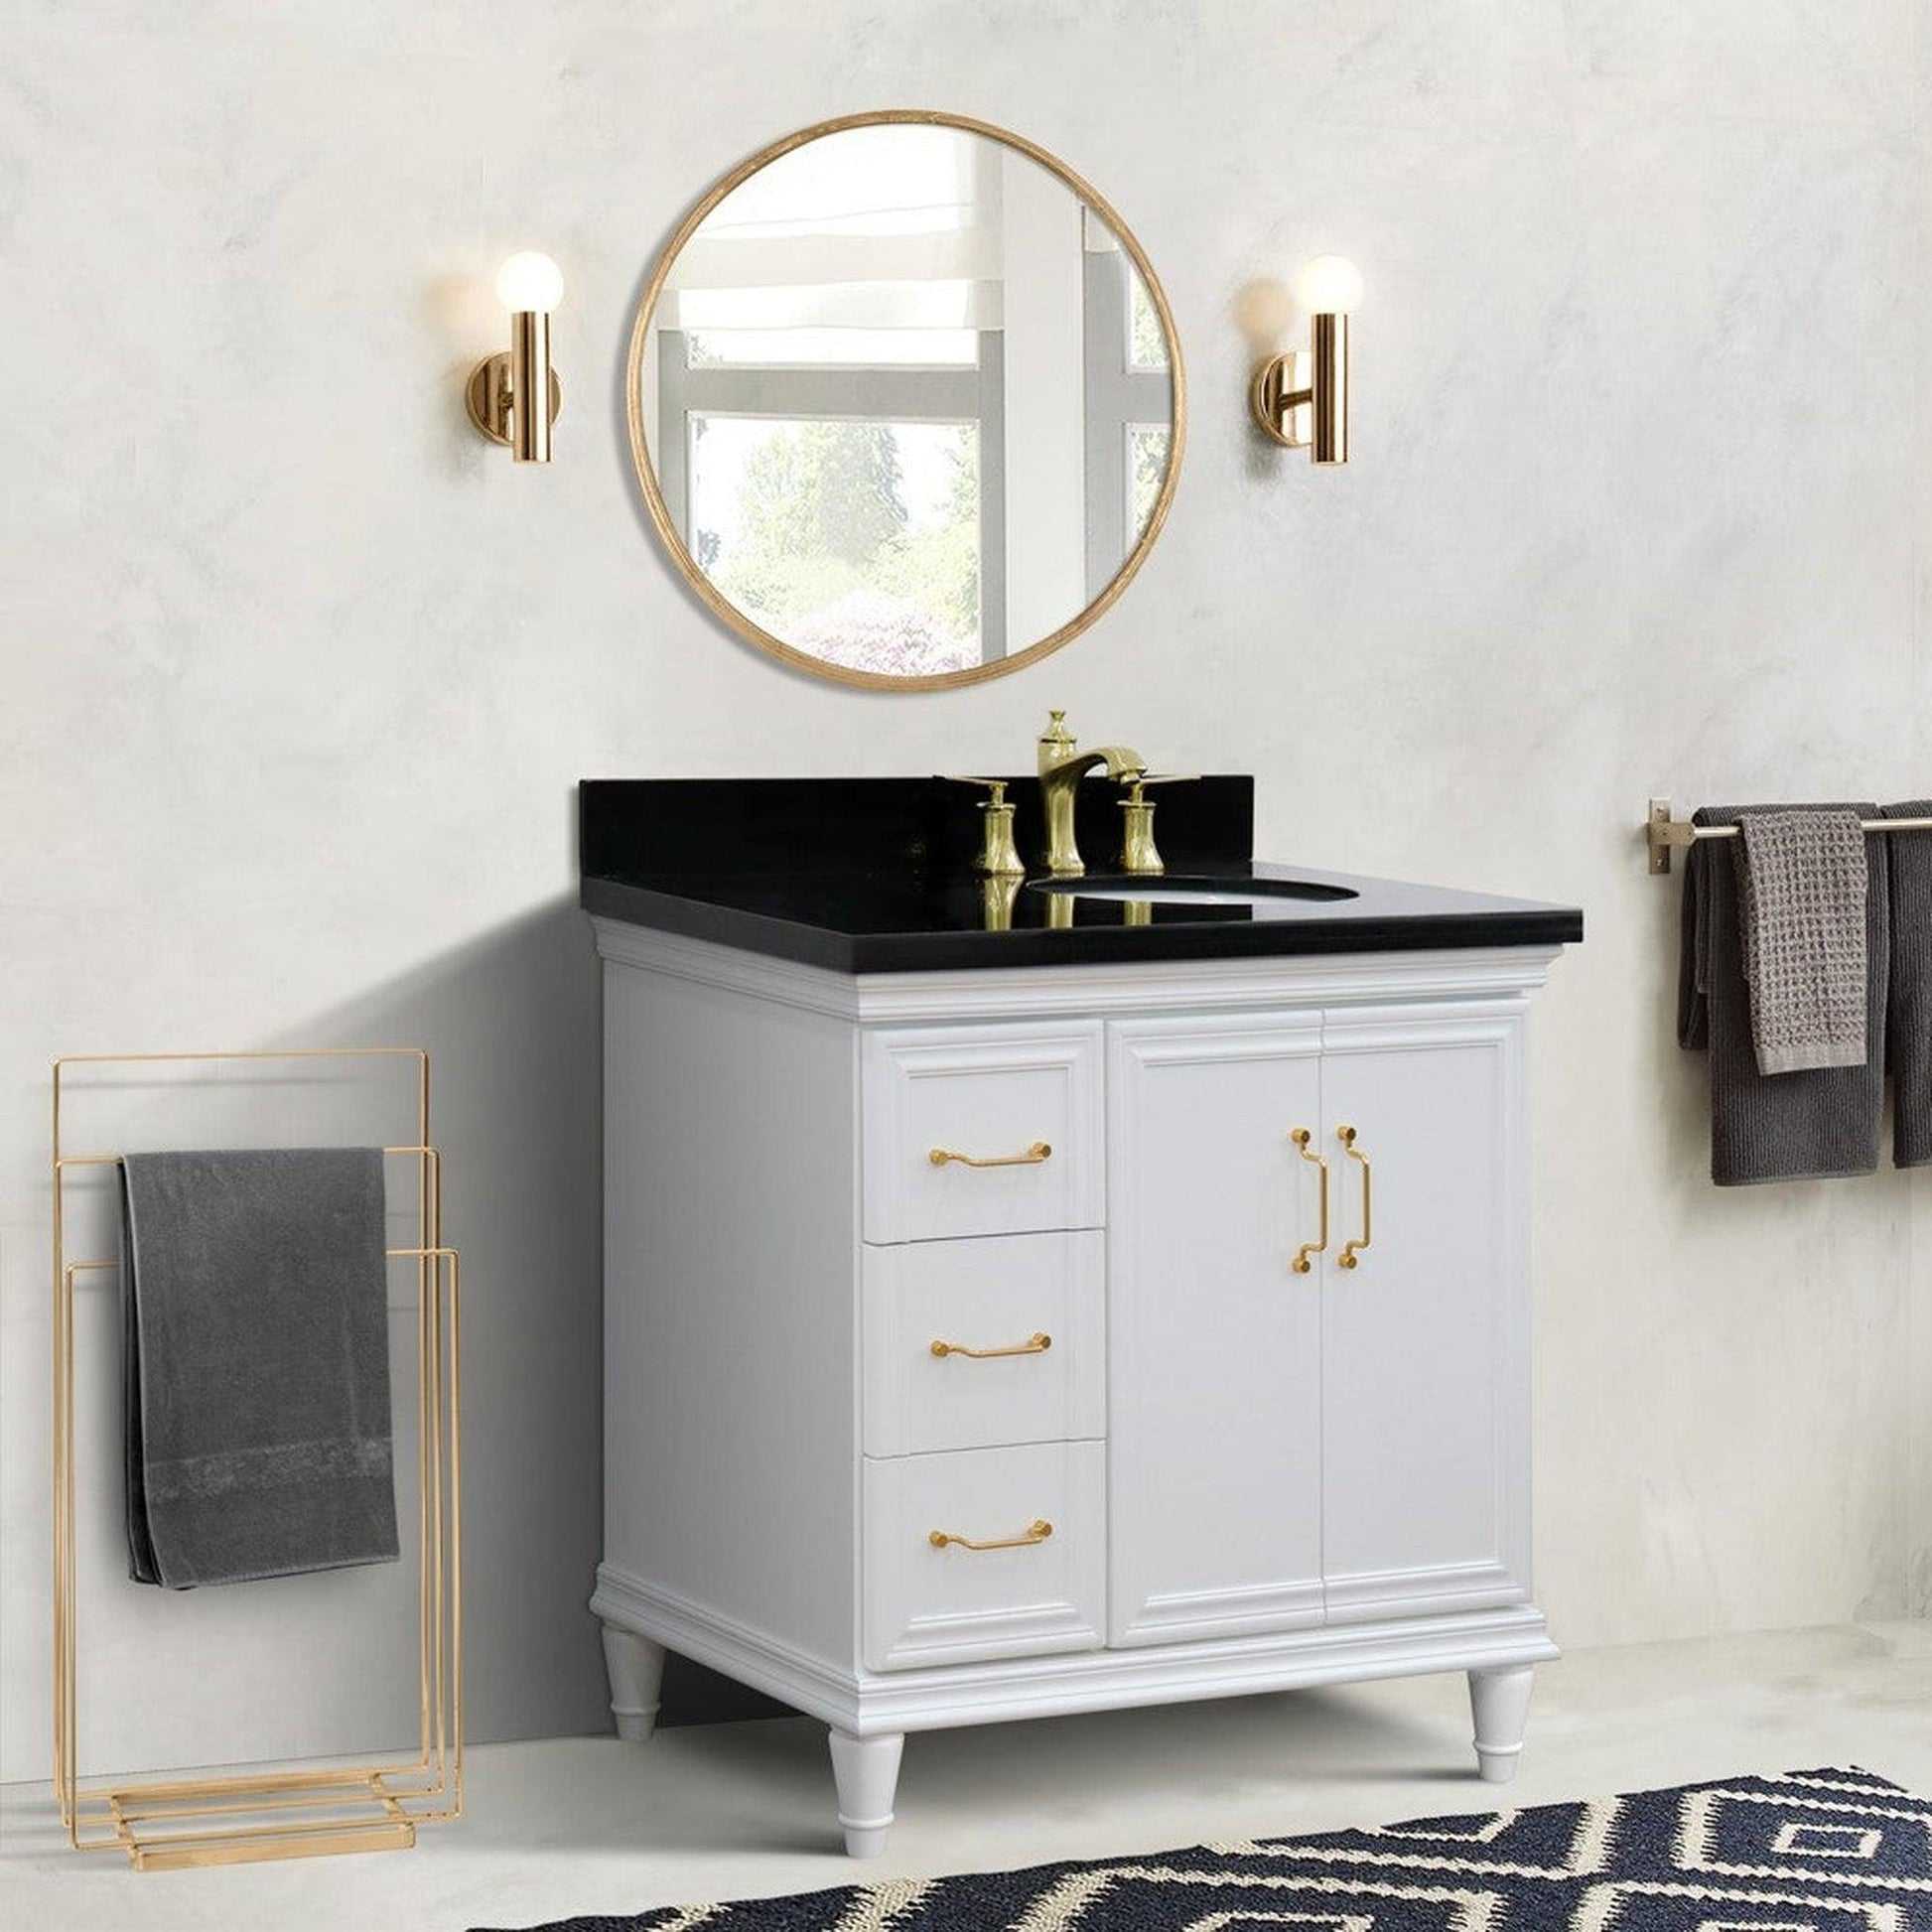 Bellaterra Home Forli 37" 2-Door 3-Drawer White Freestanding Vanity Set With Ceramic Right Offset Undermount Oval Sink and Black Galaxy Granite Top, and Right Door Cabinet